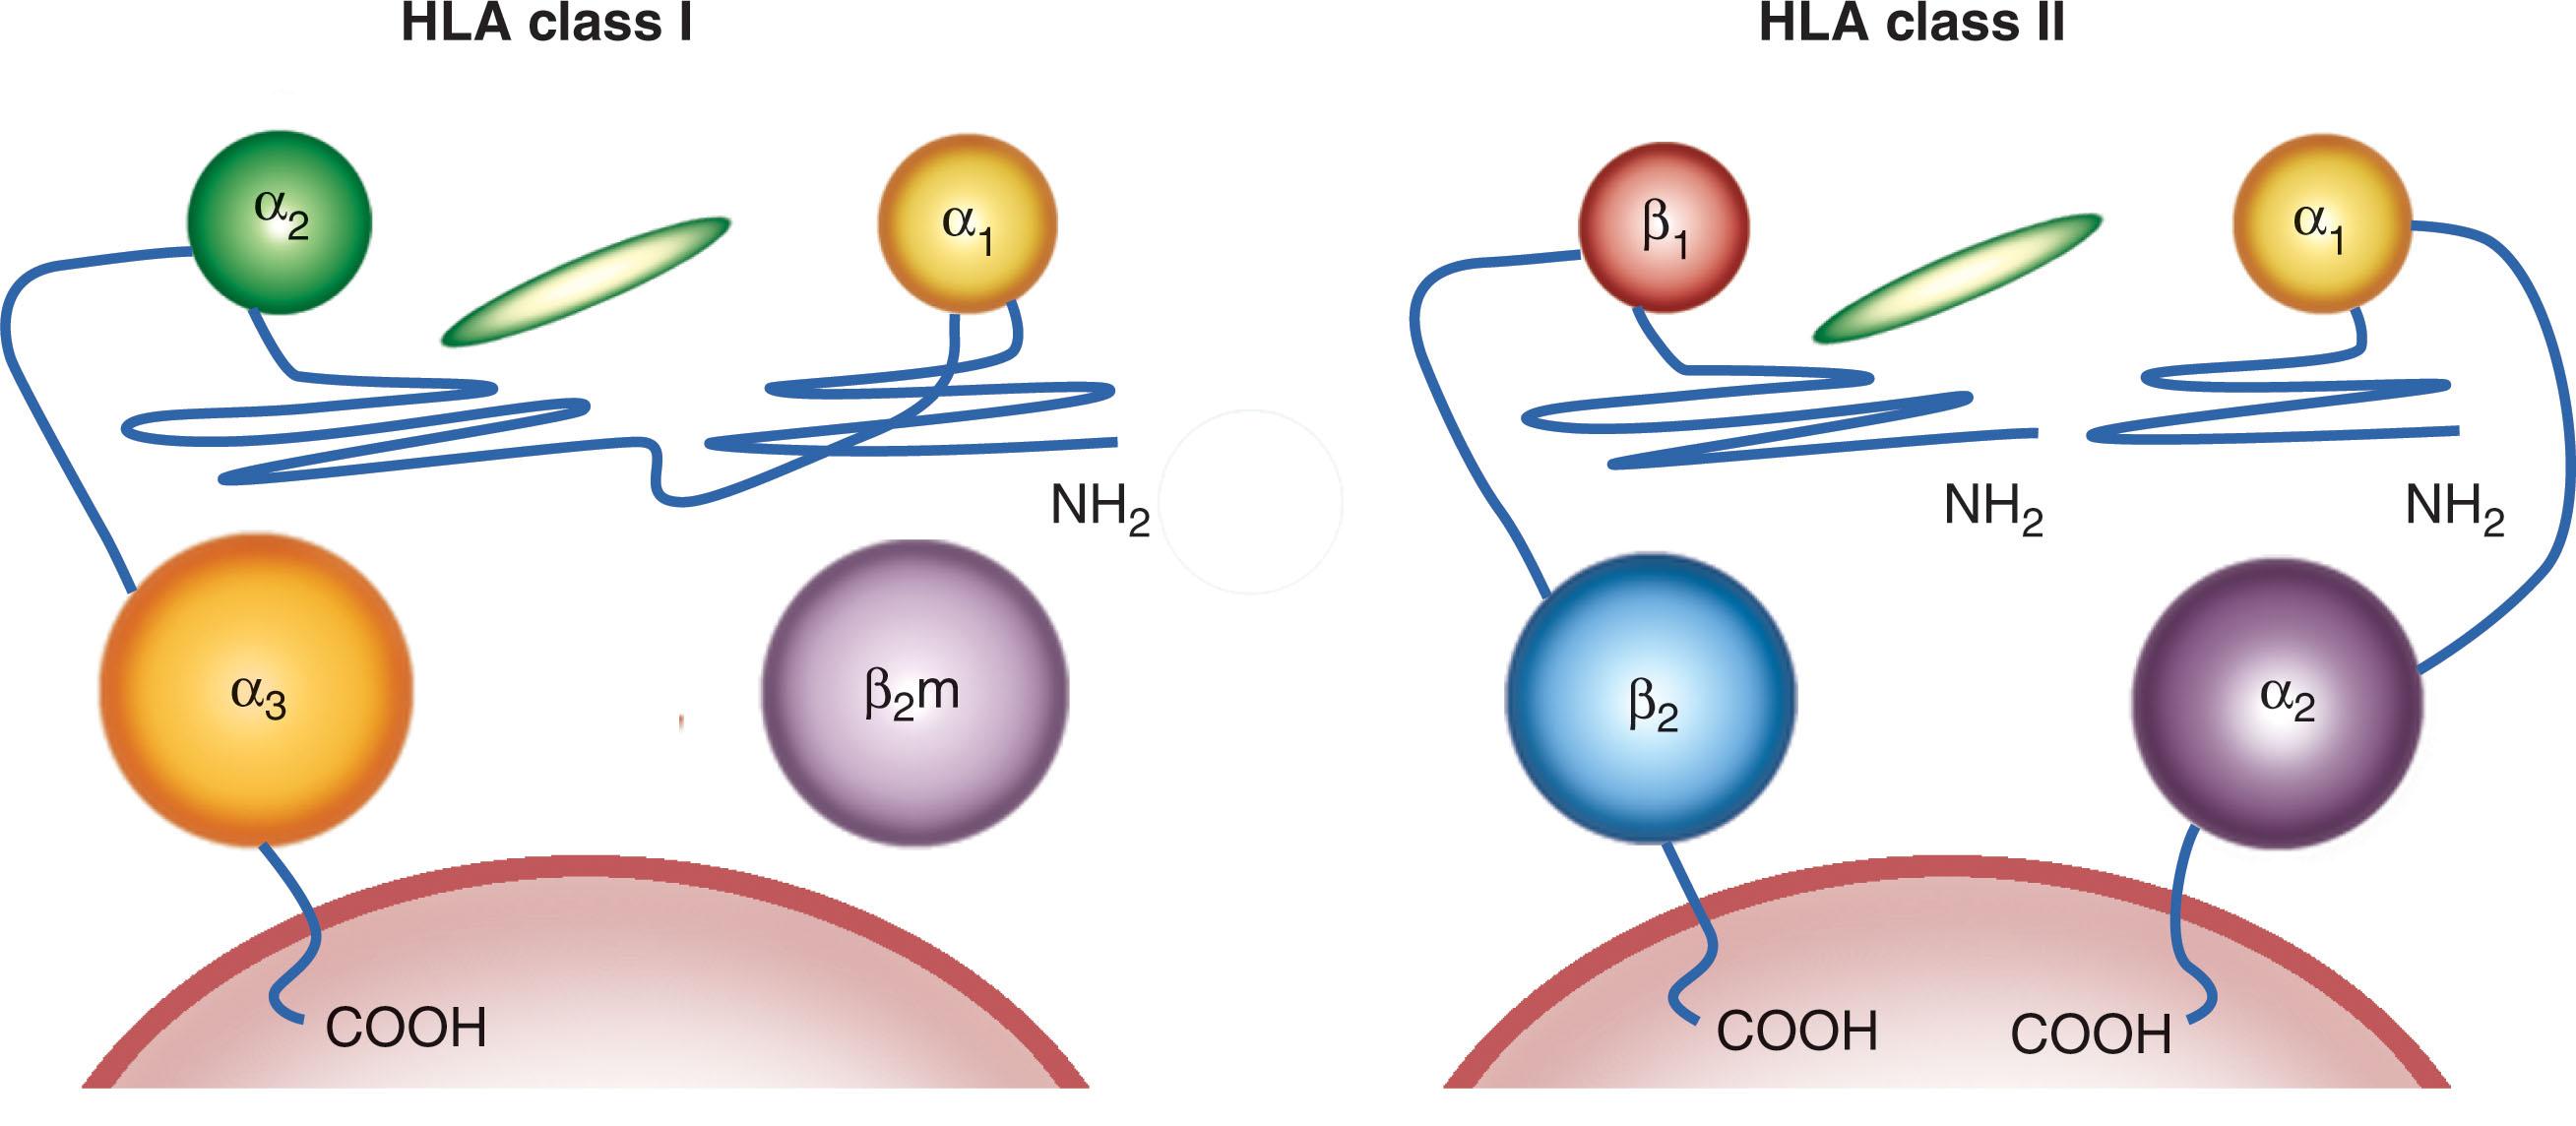 Figure 114.4, SCHEMATIC DIAGRAM OF HUMAN LEUKOCYTE ANTIGEN (HLA) CLASS I AND CLASS II MOLECULES POINTINGTO THEIR STRUCTURAL SIMILARITY.